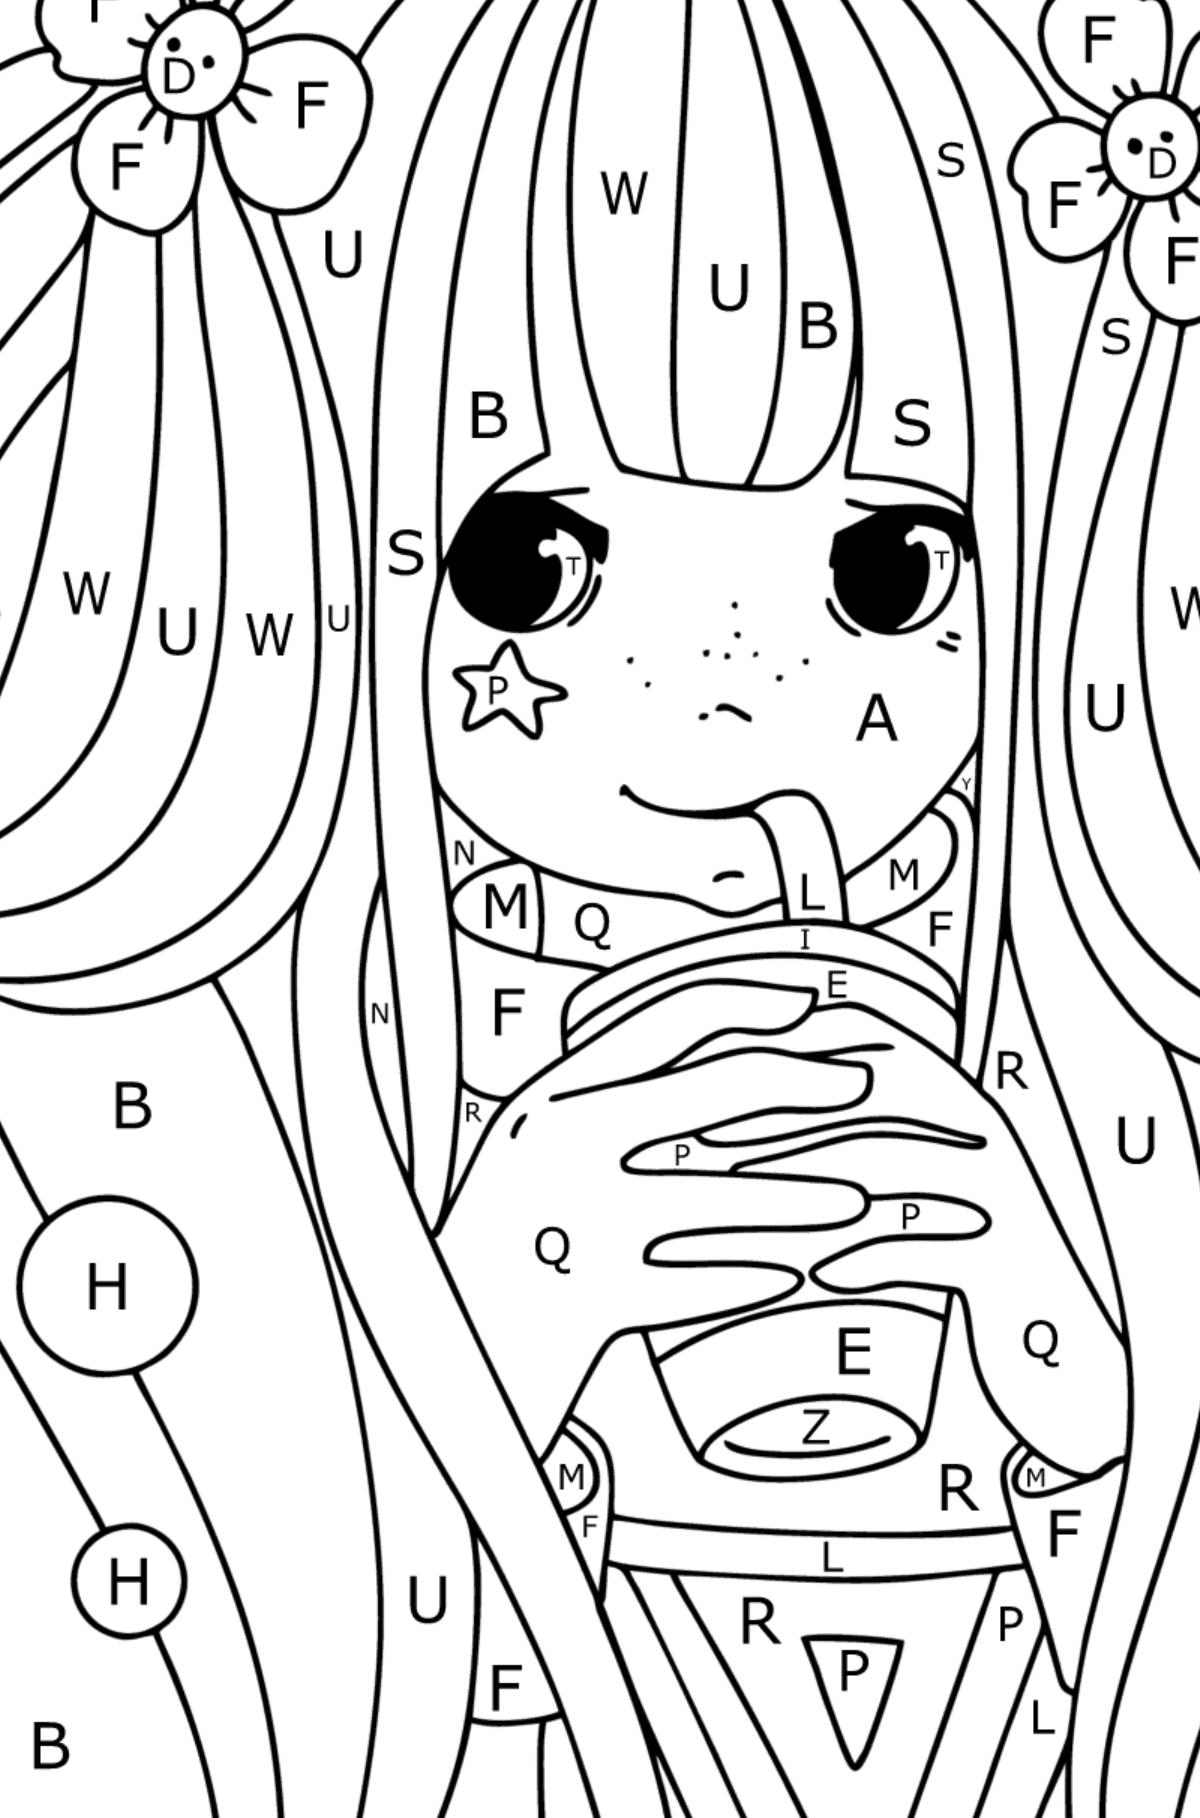 Girl anime fashionista coloring page - Coloring by Letters for Kids